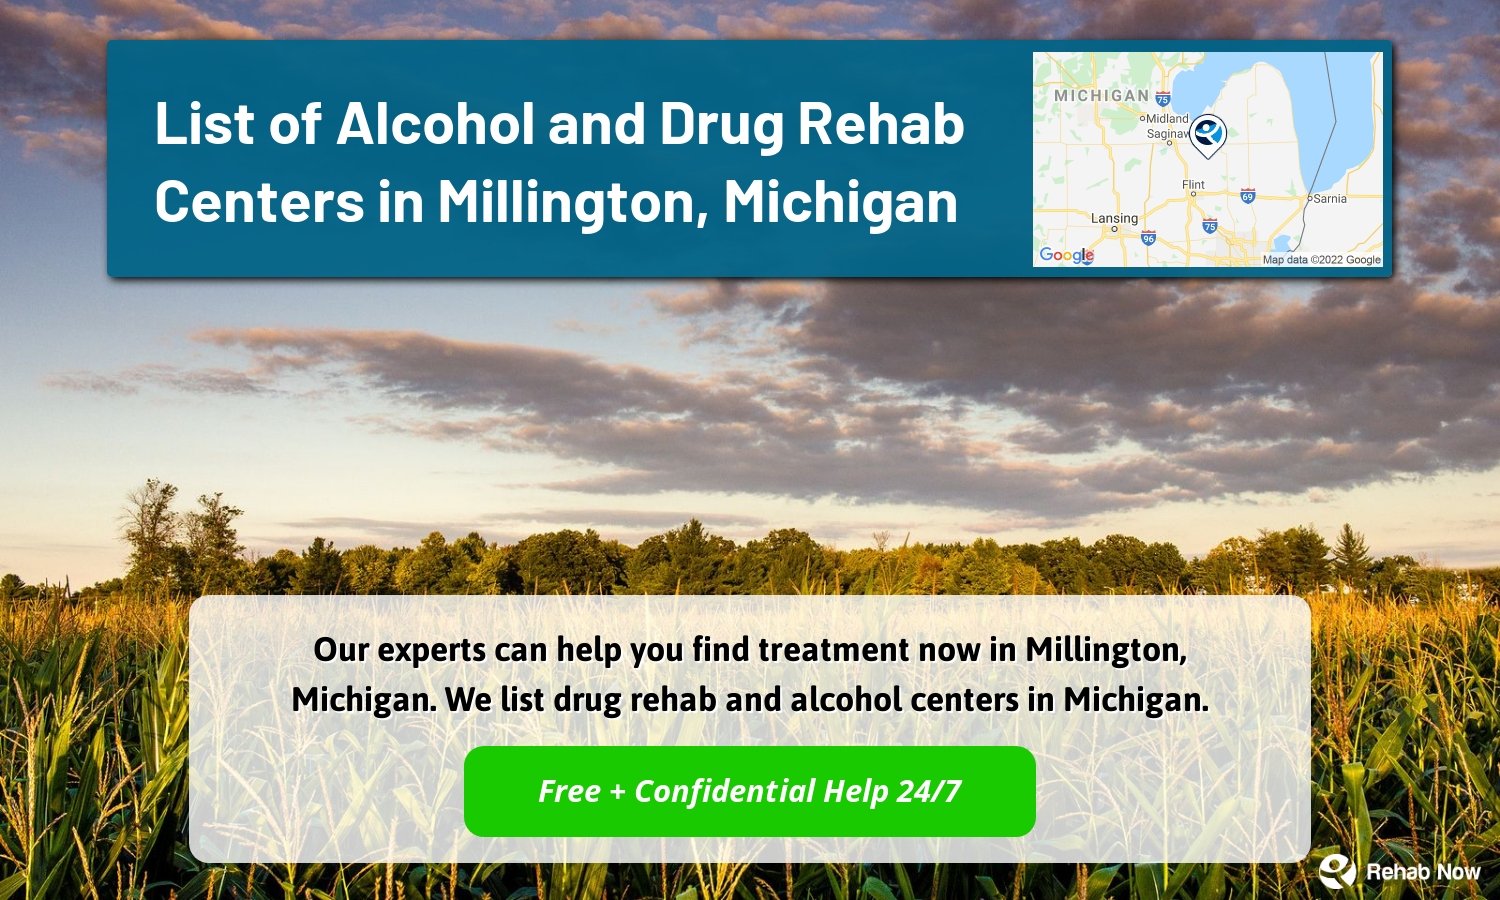 Our experts can help you find treatment now in Millington, Michigan. We list drug rehab and alcohol centers in Michigan.